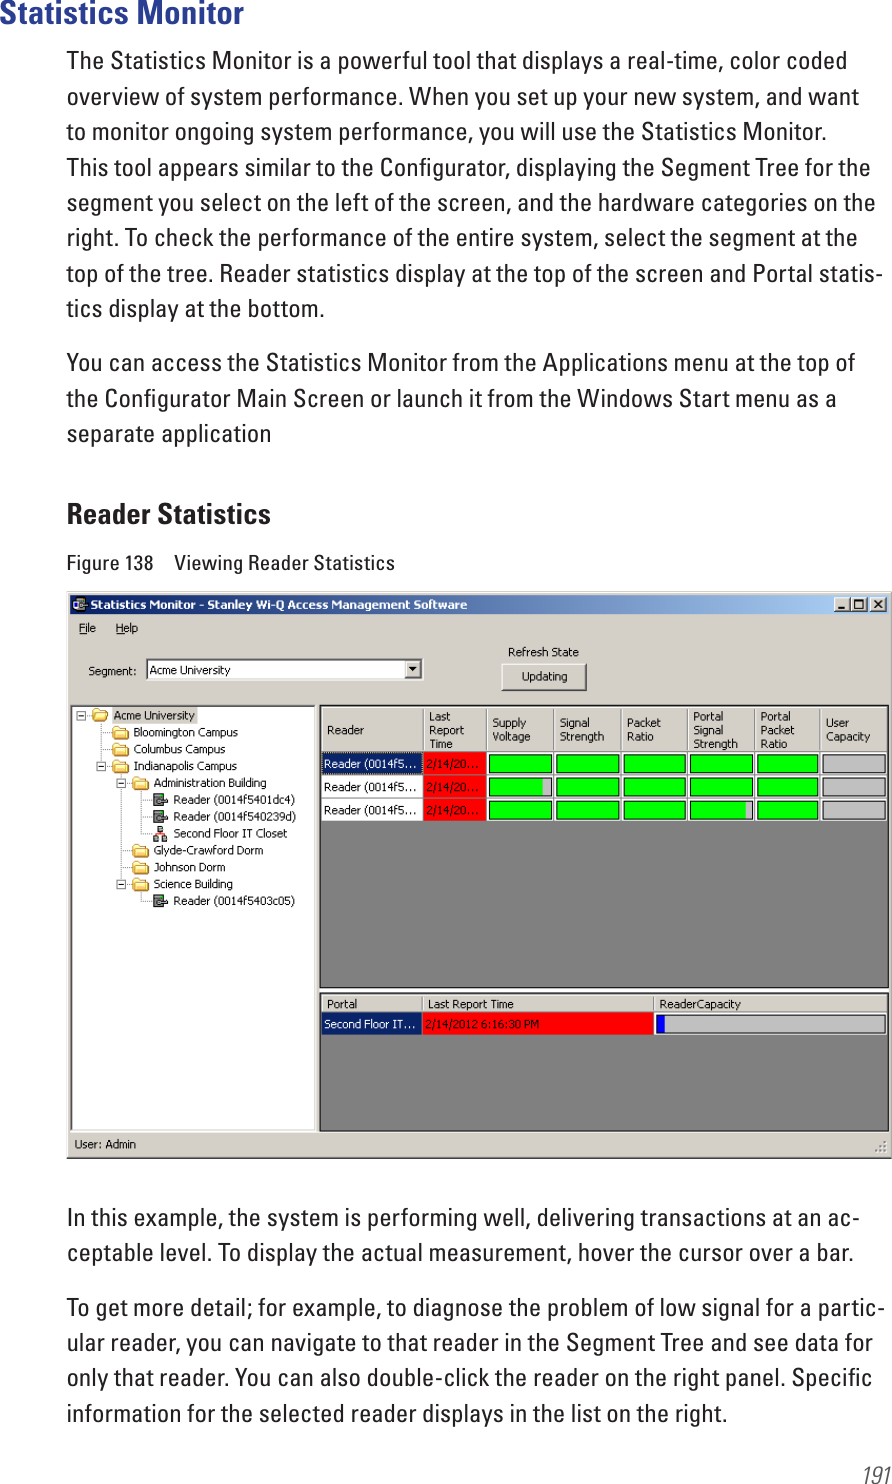 191 Statistics MonitorThe Statistics Monitor is a powerful tool that displays a real-time, color coded overview of system performance. When you set up your new system, and want to monitor ongoing system performance, you will use the Statistics Monitor. This tool appears similar to the Conﬁgurator, displaying the Segment Tree for the segment you select on the left of the screen, and the hardware categories on the right. To check the performance of the entire system, select the segment at the top of the tree. Reader statistics display at the top of the screen and Portal statis-tics display at the bottom.You can access the Statistics Monitor from the Applications menu at the top of the Conﬁgurator Main Screen or launch it from the Windows Start menu as a separate applicationReader StatisticsFigure 138  Viewing Reader StatisticsIn this example, the system is performing well, delivering transactions at an ac-ceptable level. To display the actual measurement, hover the cursor over a bar.To get more detail; for example, to diagnose the problem of low signal for a partic-ular reader, you can navigate to that reader in the Segment Tree and see data for only that reader. You can also double-click the reader on the right panel. Speciﬁc information for the selected reader displays in the list on the right.